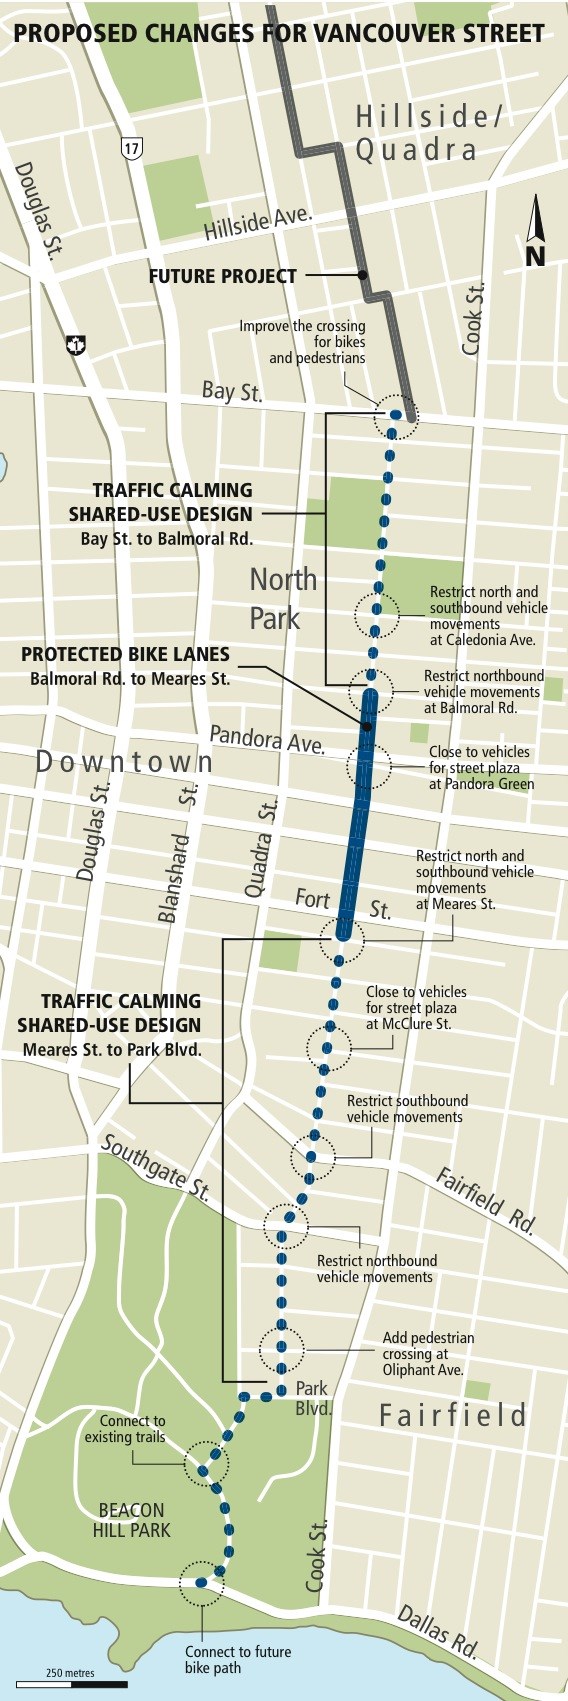 Map - proposed changes for Vancouver Street, April 2019